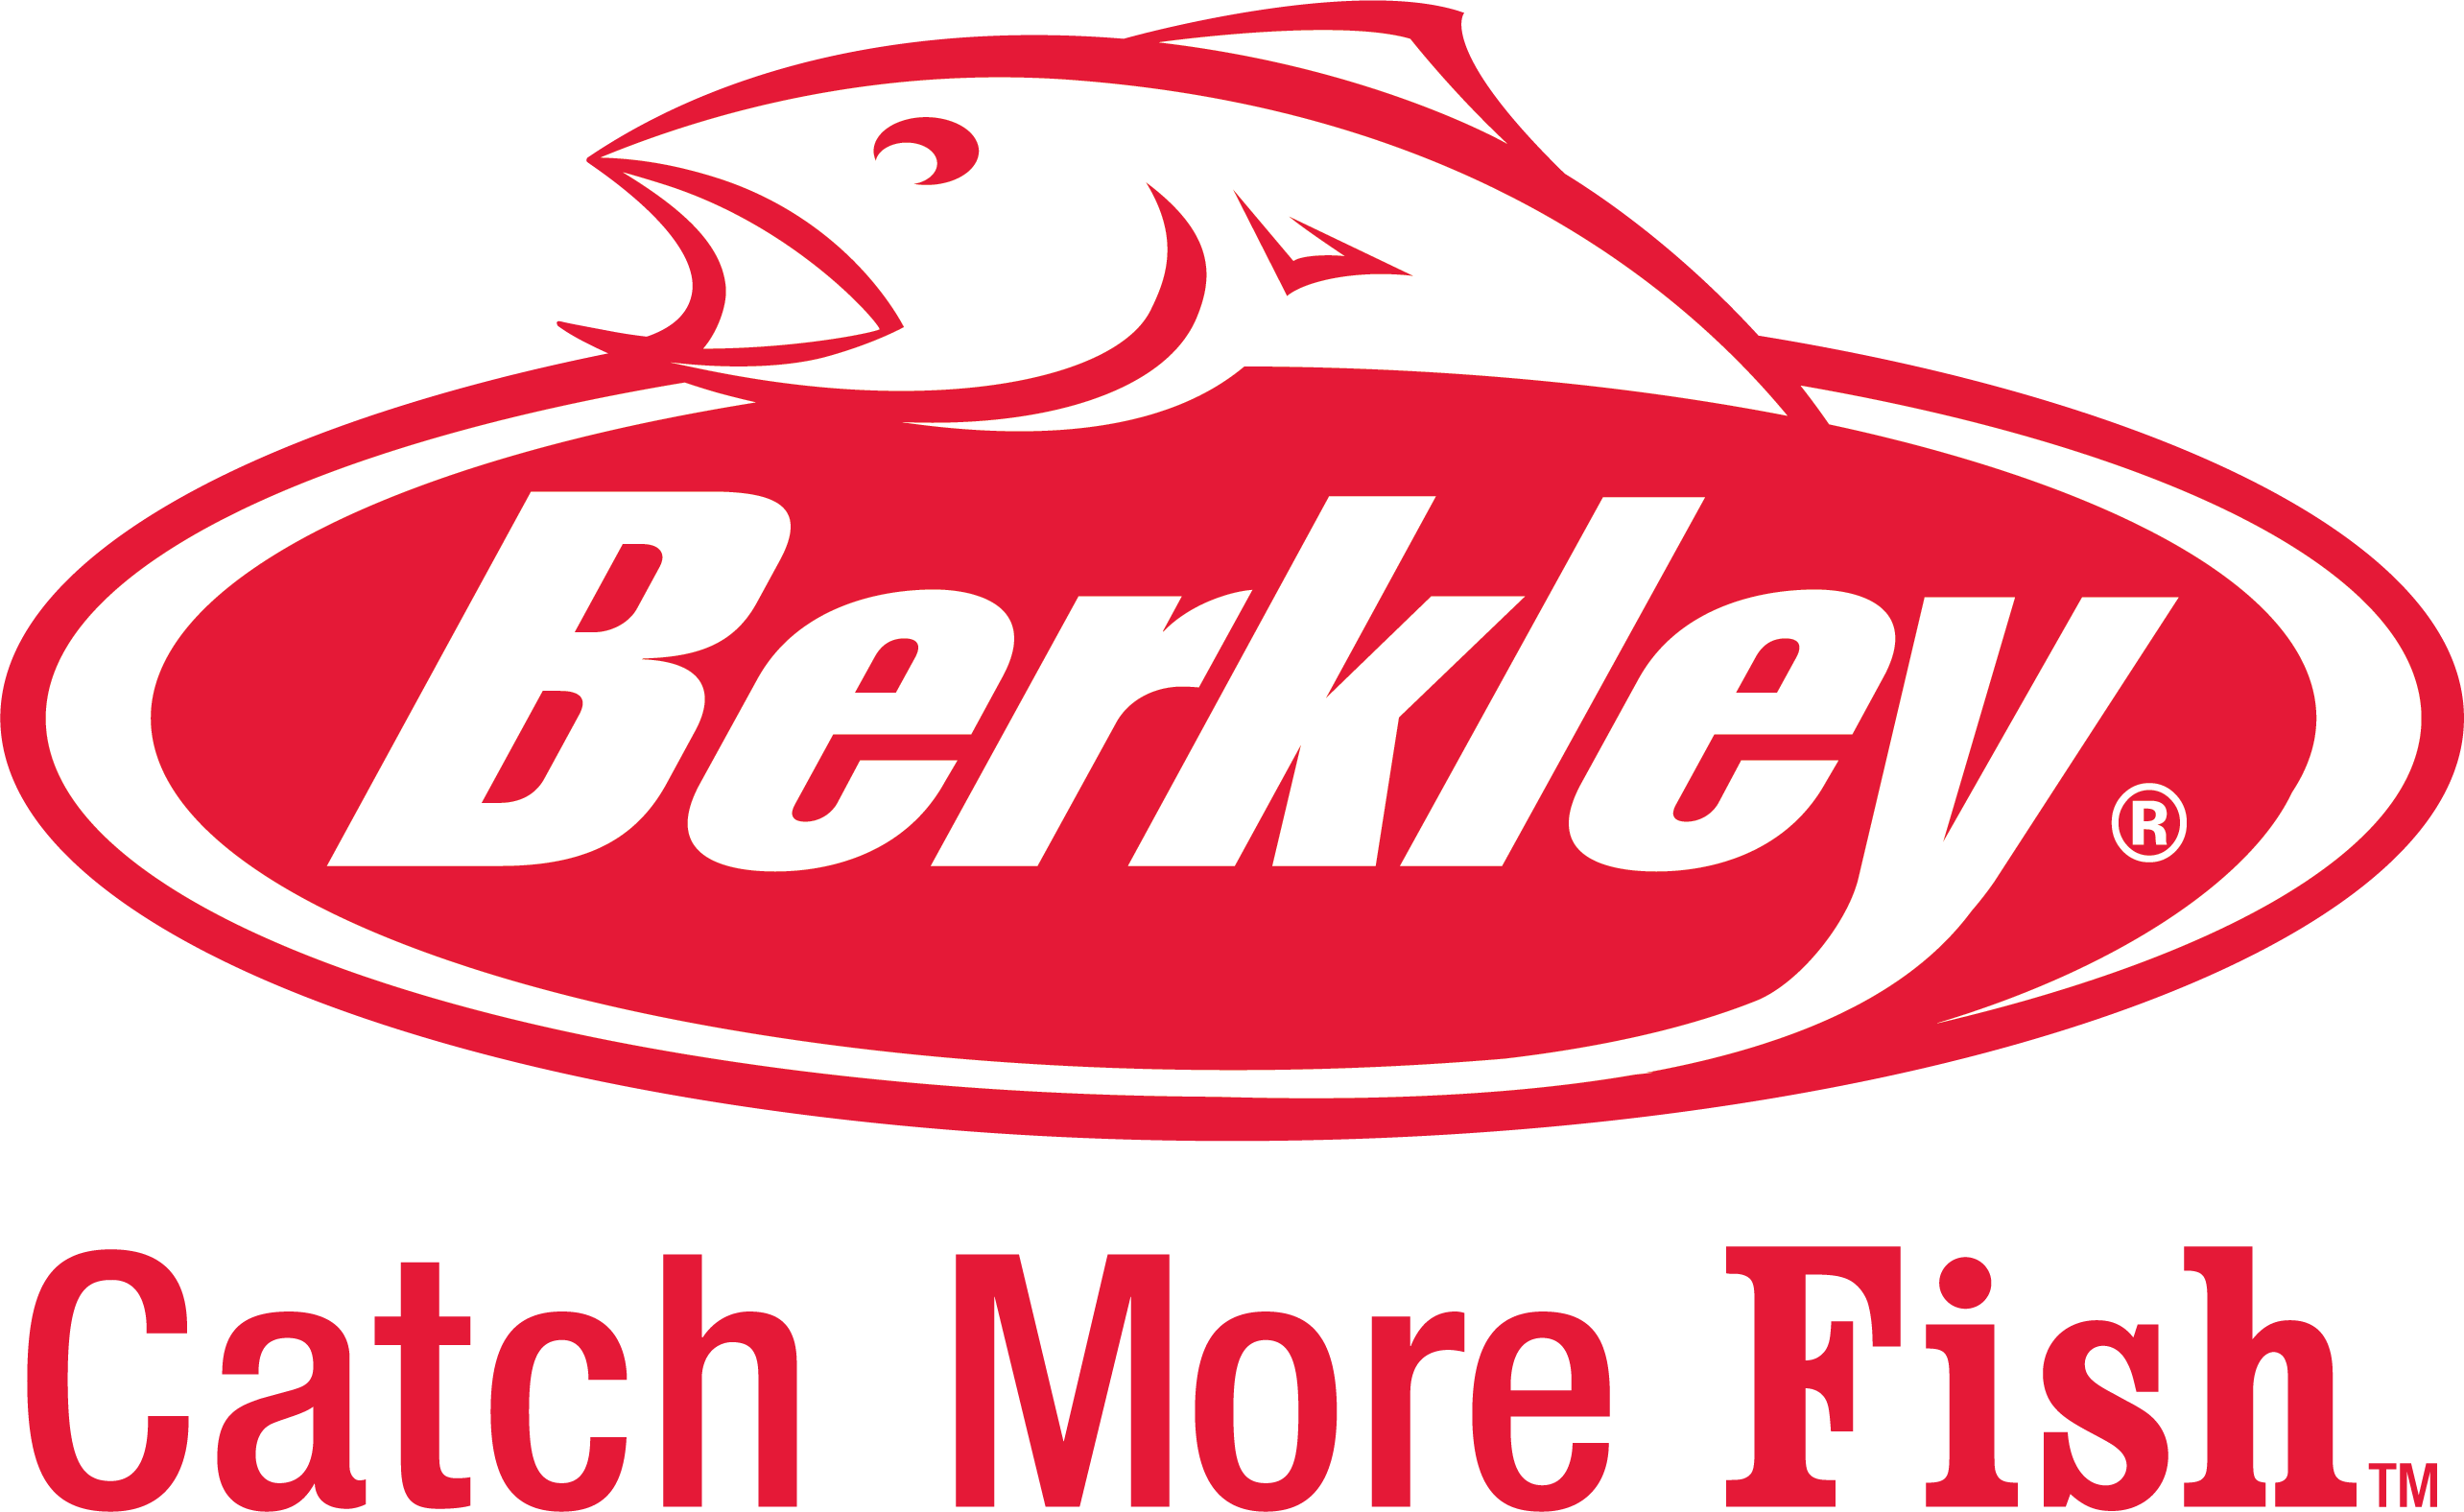 Berkley Fishing is a sponsor of the Outdoor News Junior Pro Team for youth ages 18 and under